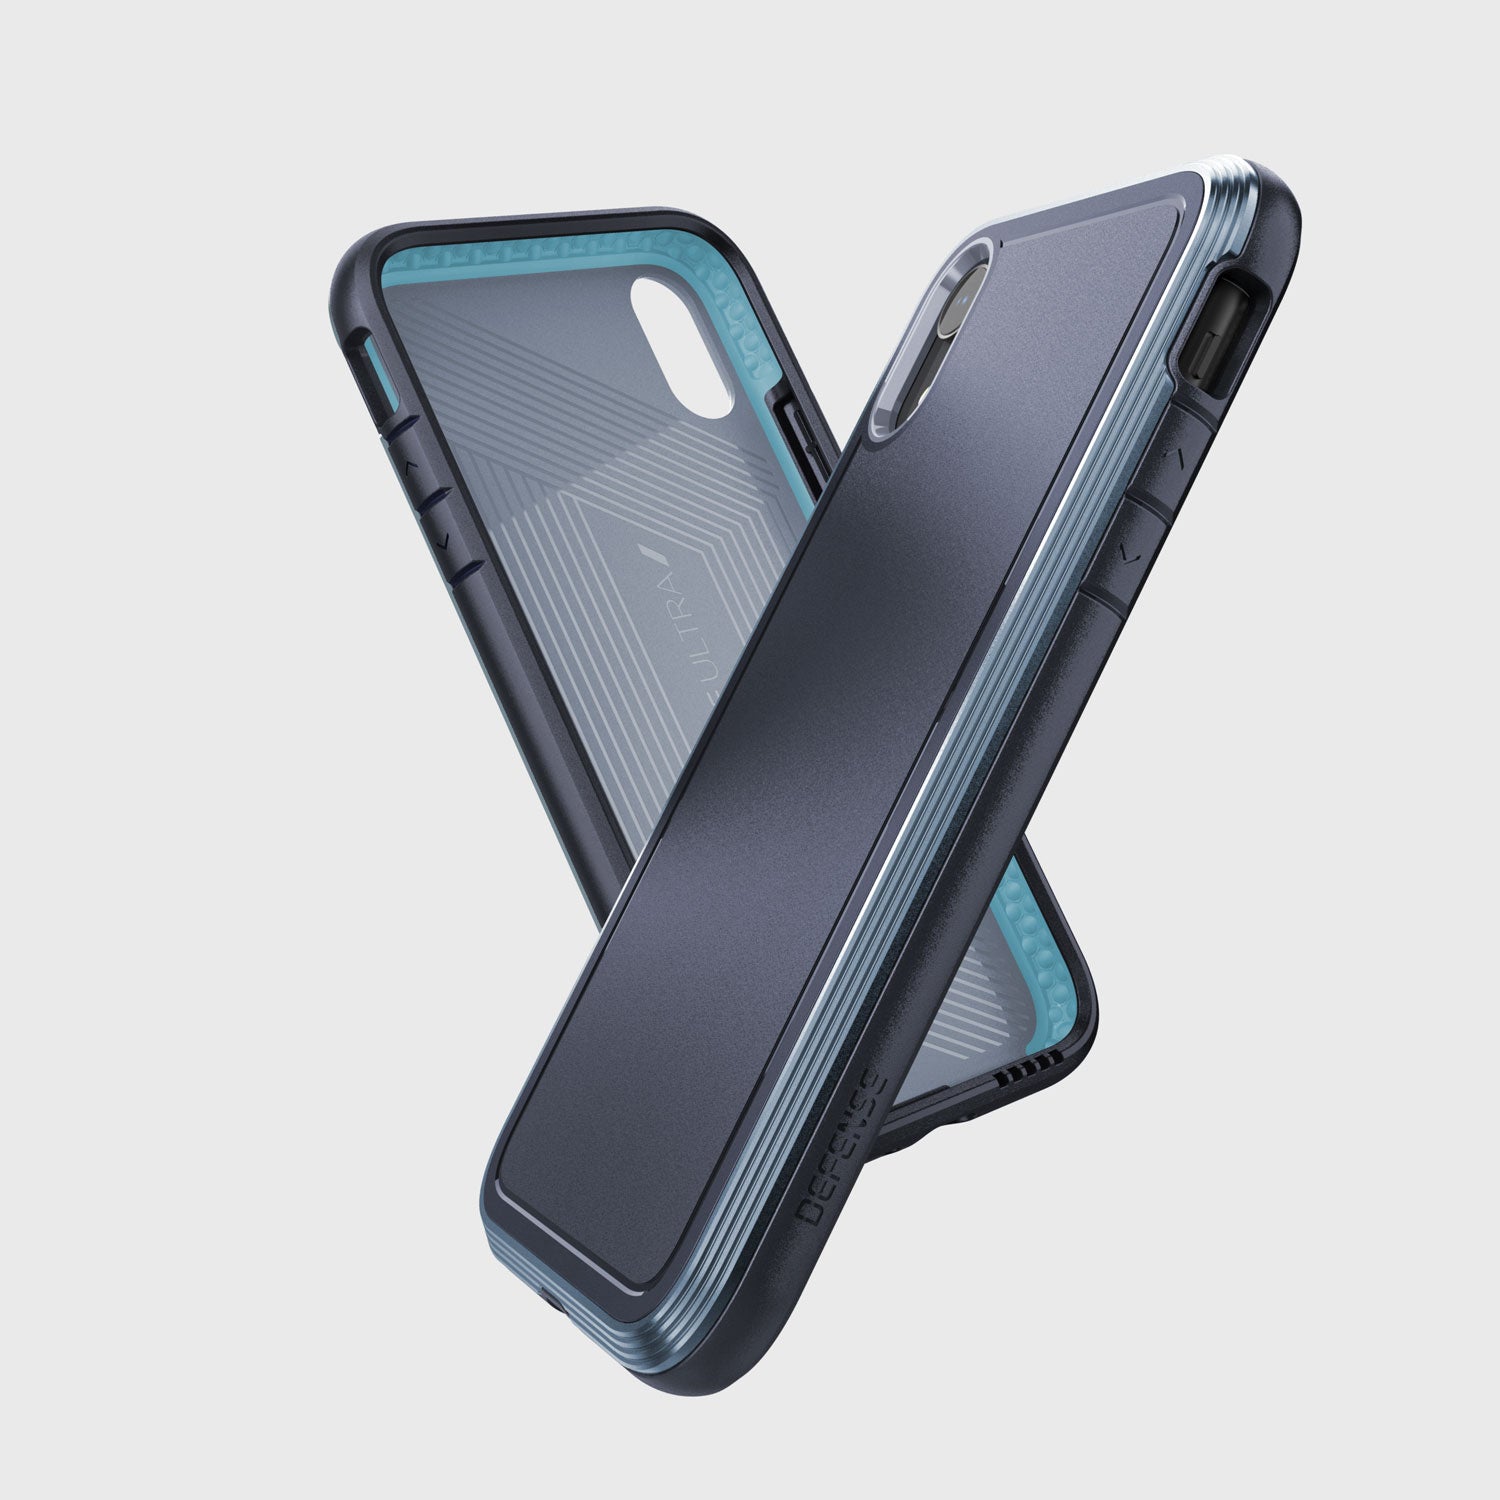 A black and blue ULTRA iPhone XR case, specifically the Raptic Ultra case, is showcased on a white background.